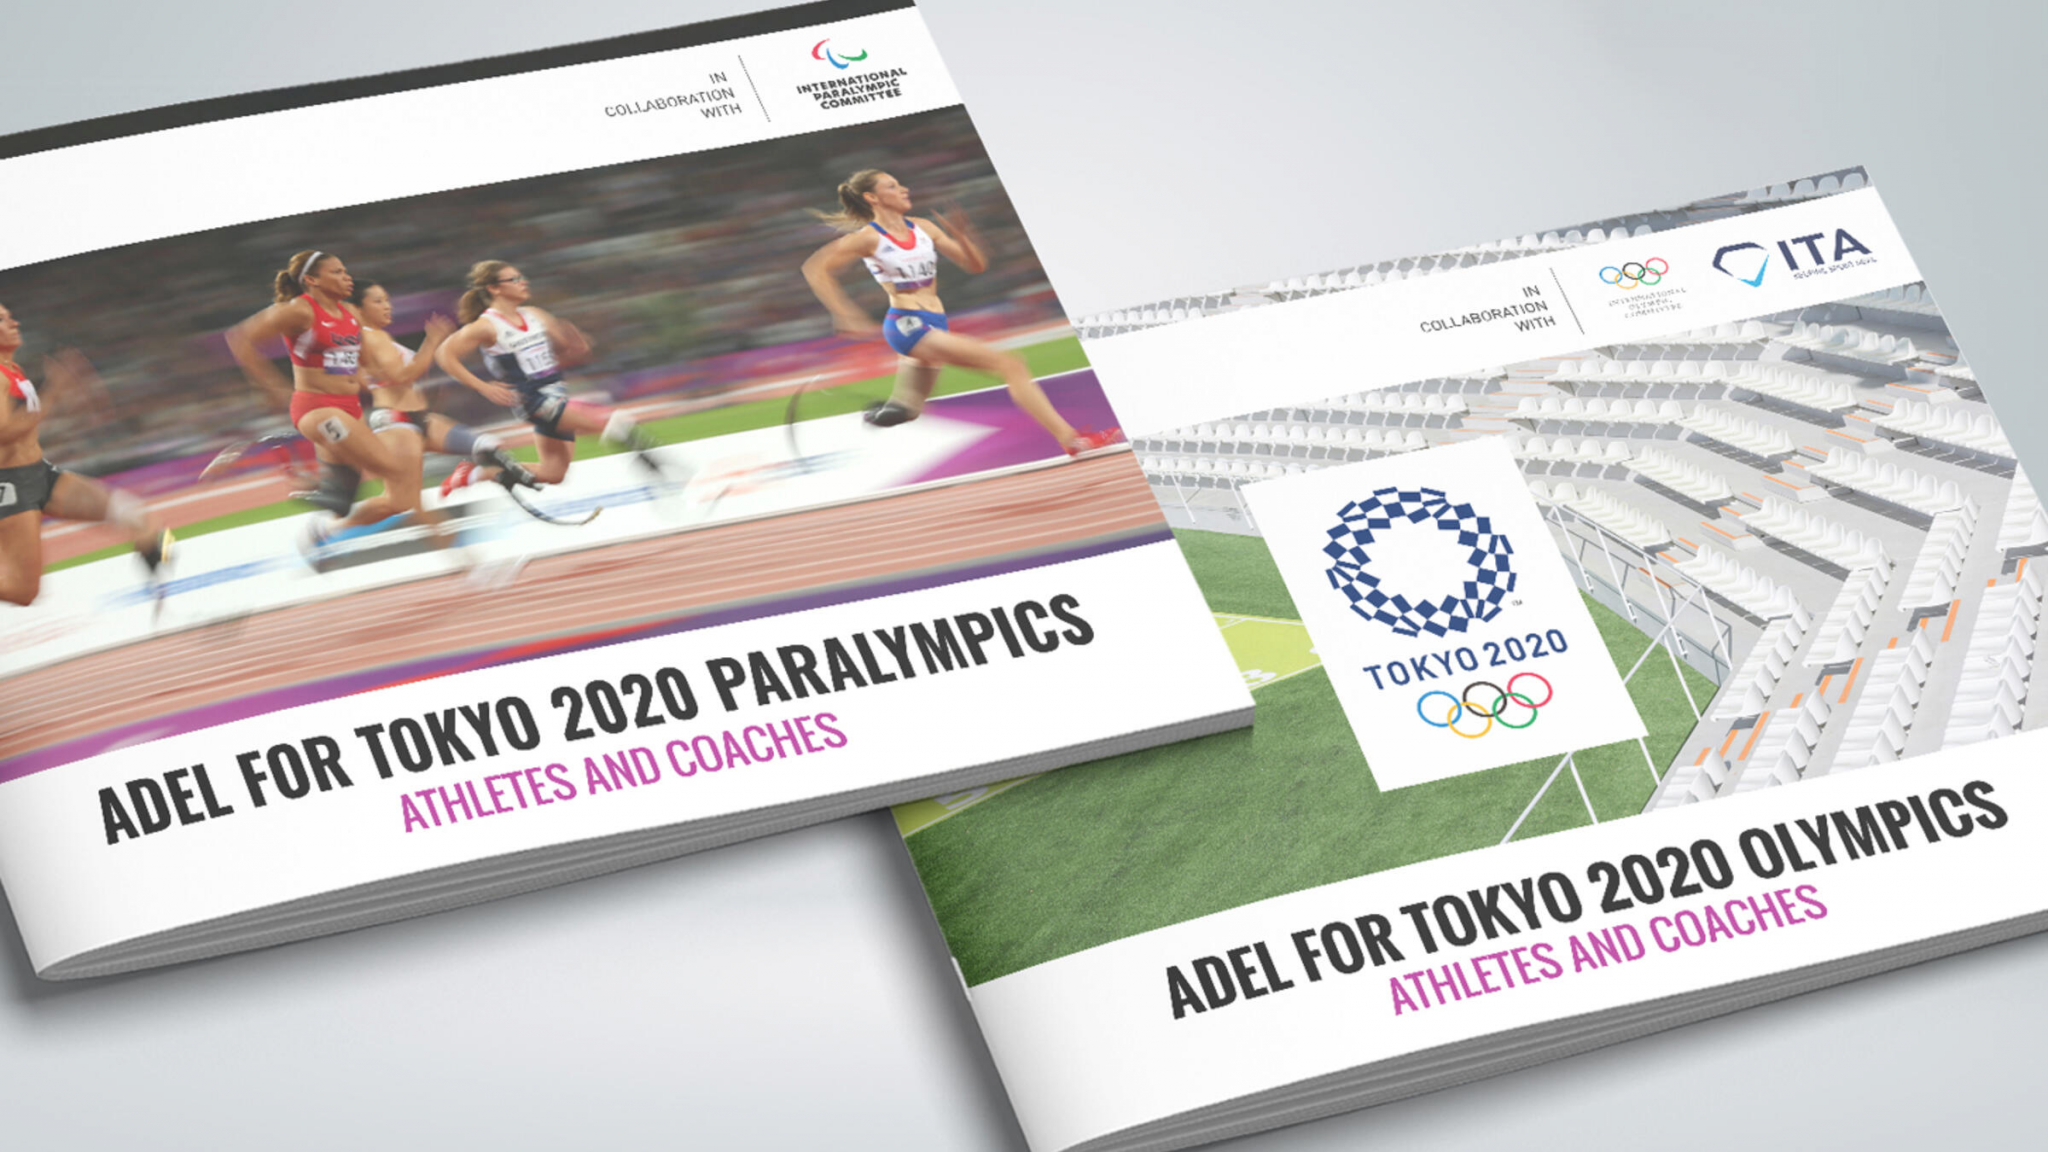 The World Anti-Doping Agency and its partners ran similar education programmes before Tokyo 2020 ©ADEL